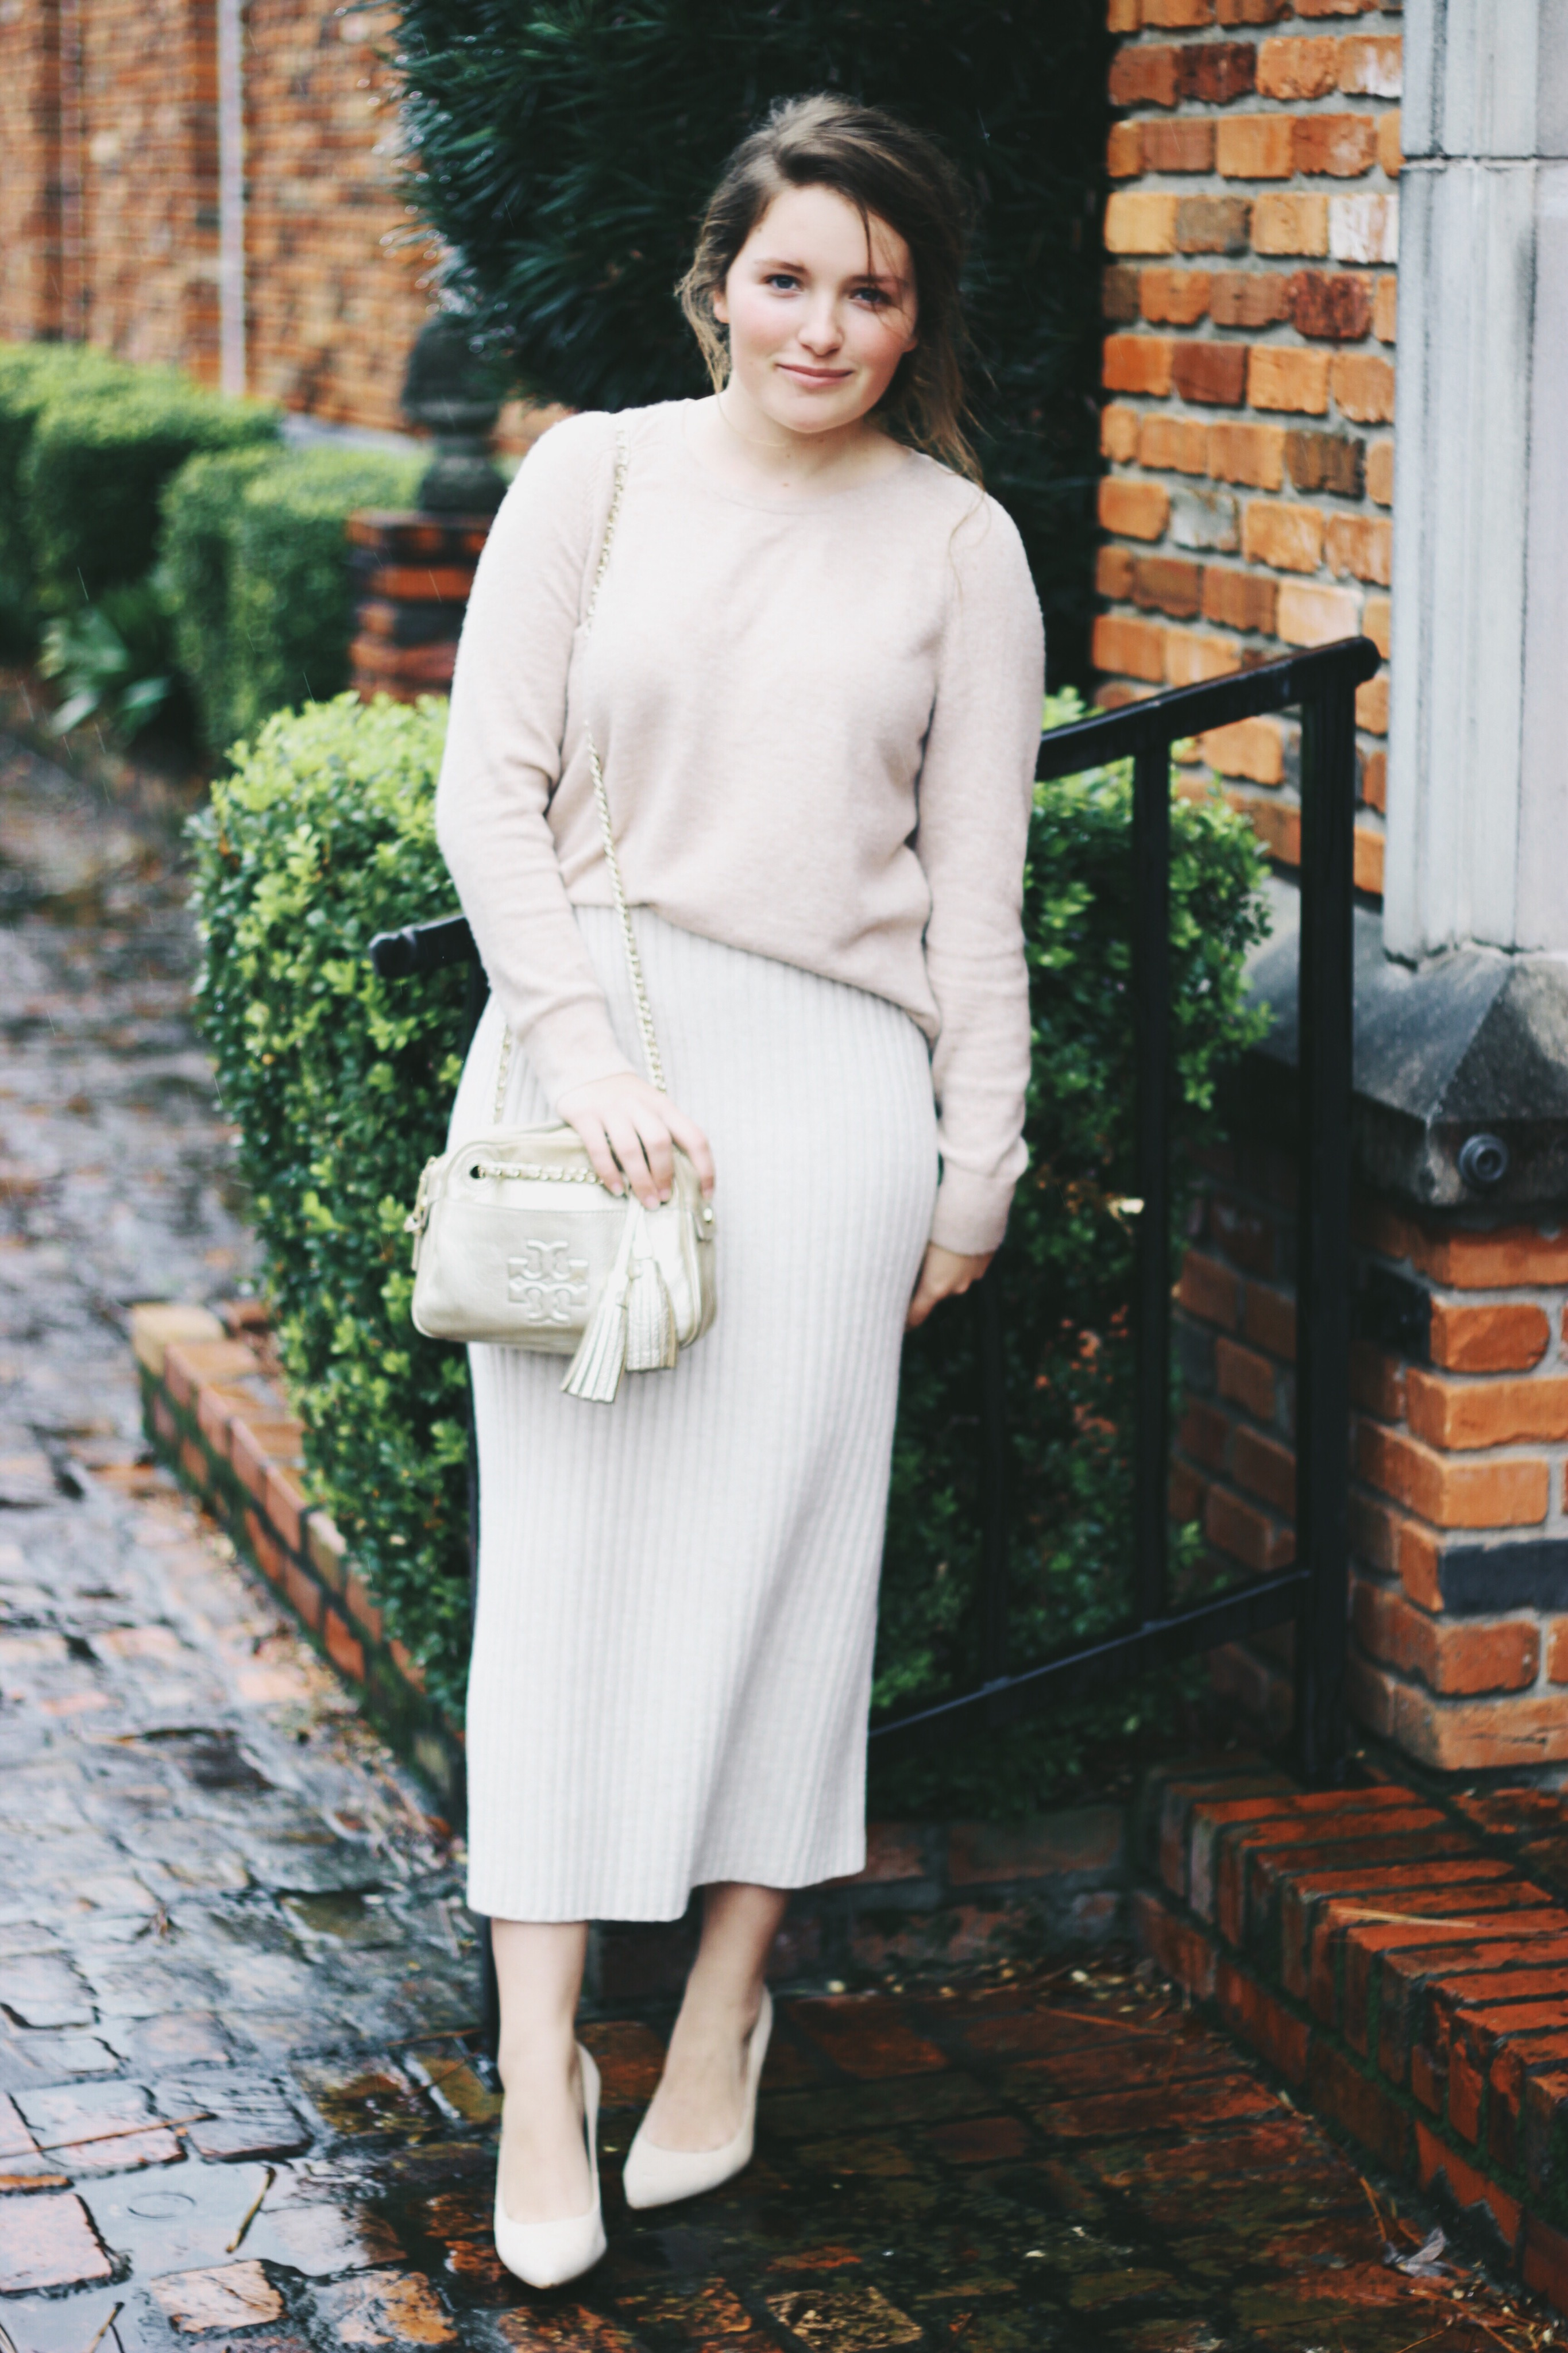 Monochrom Outfit Inspiration by @courtneytoliver on @ShesIntentional